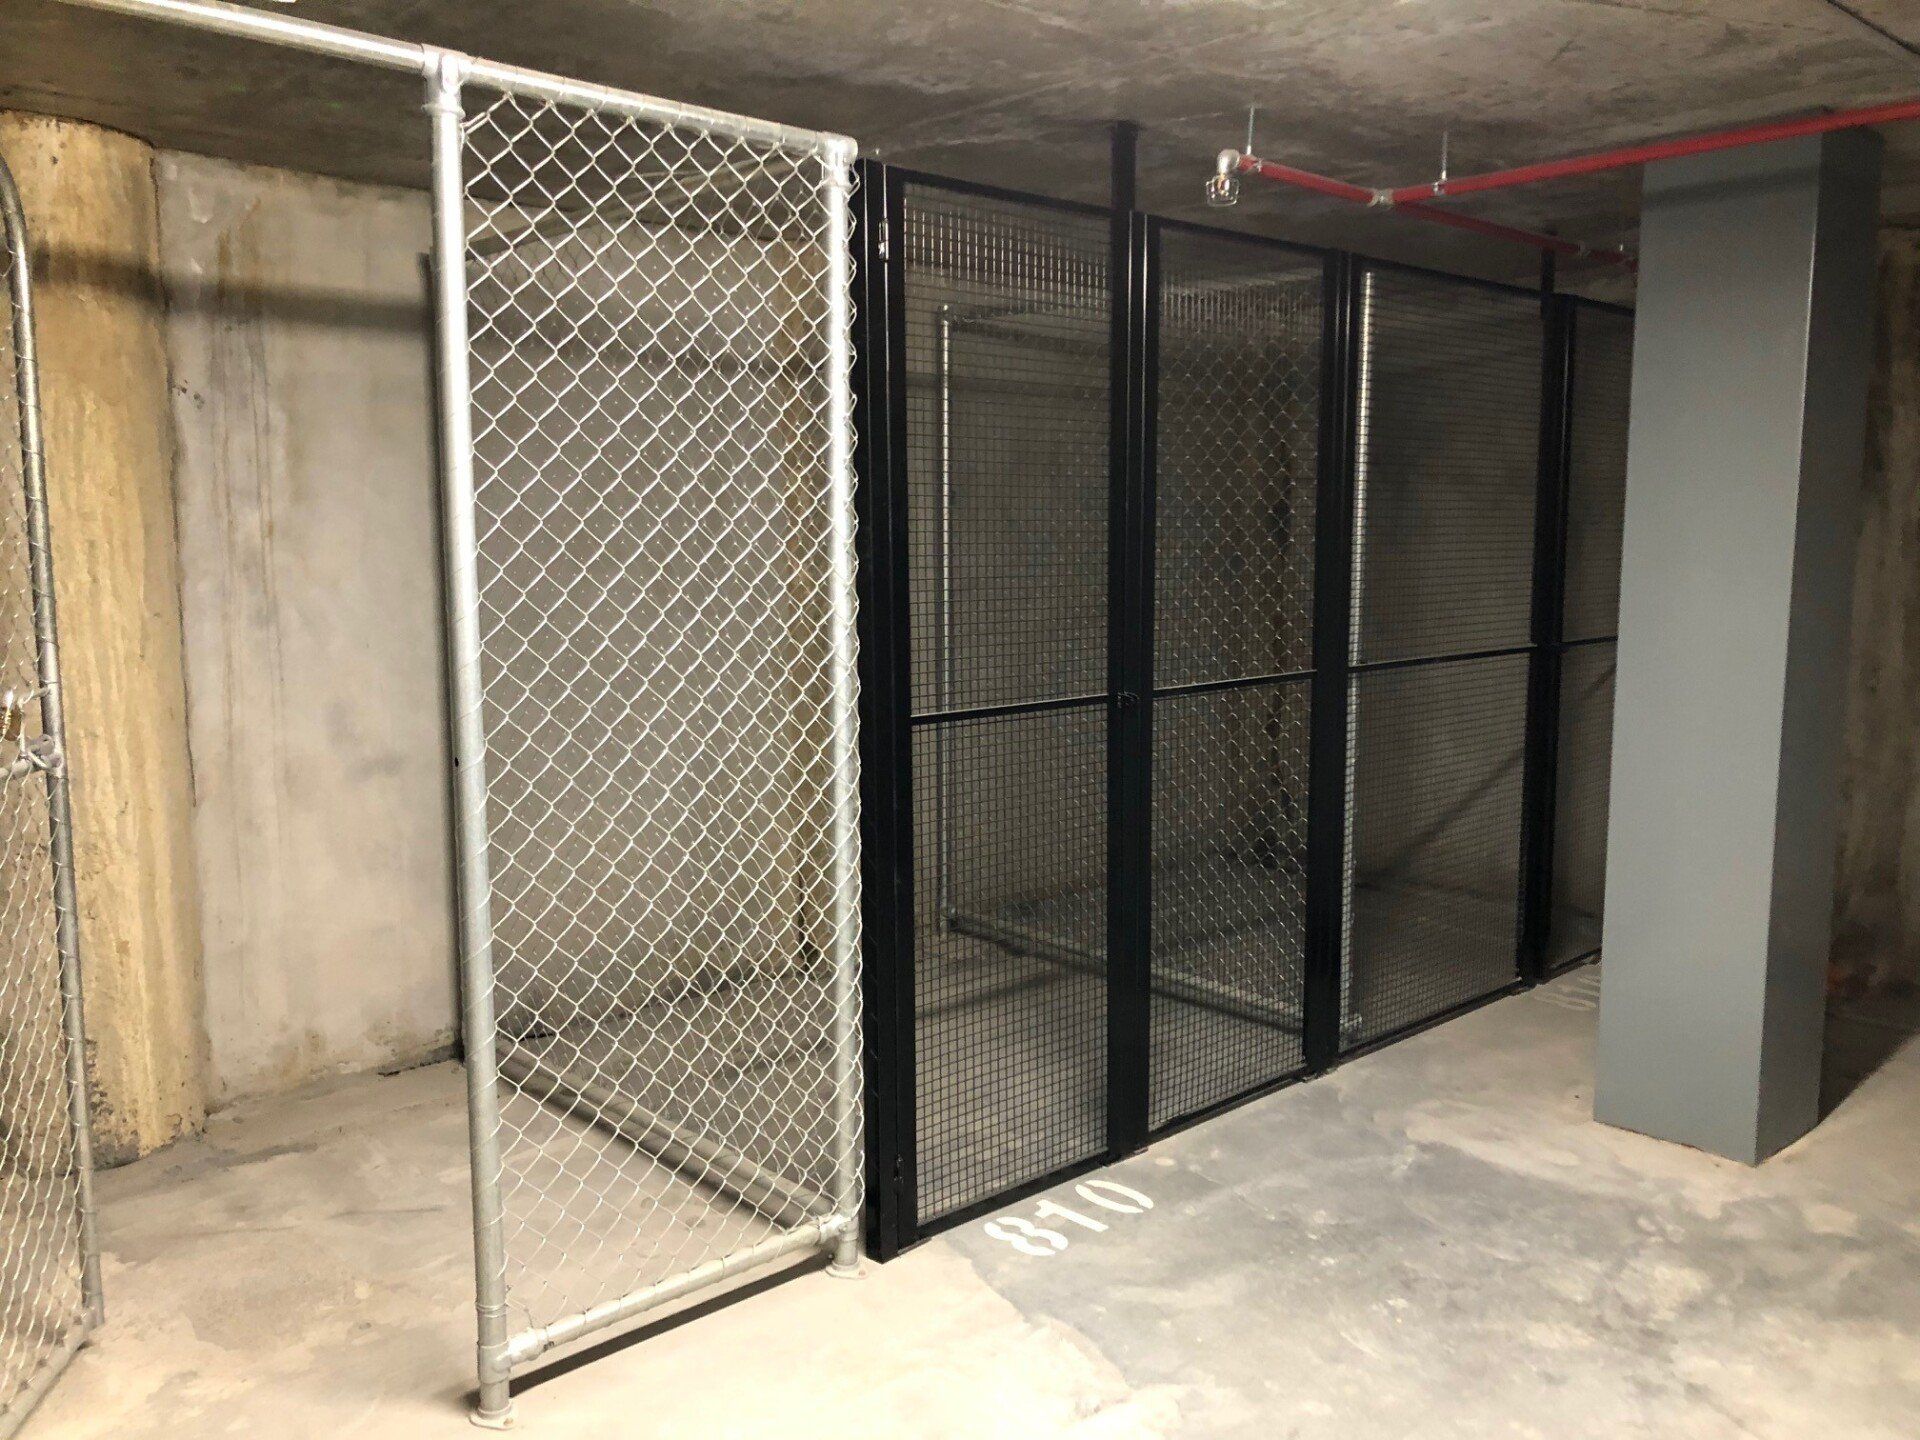 Chain mesh and black weld mesh storage cage side by side